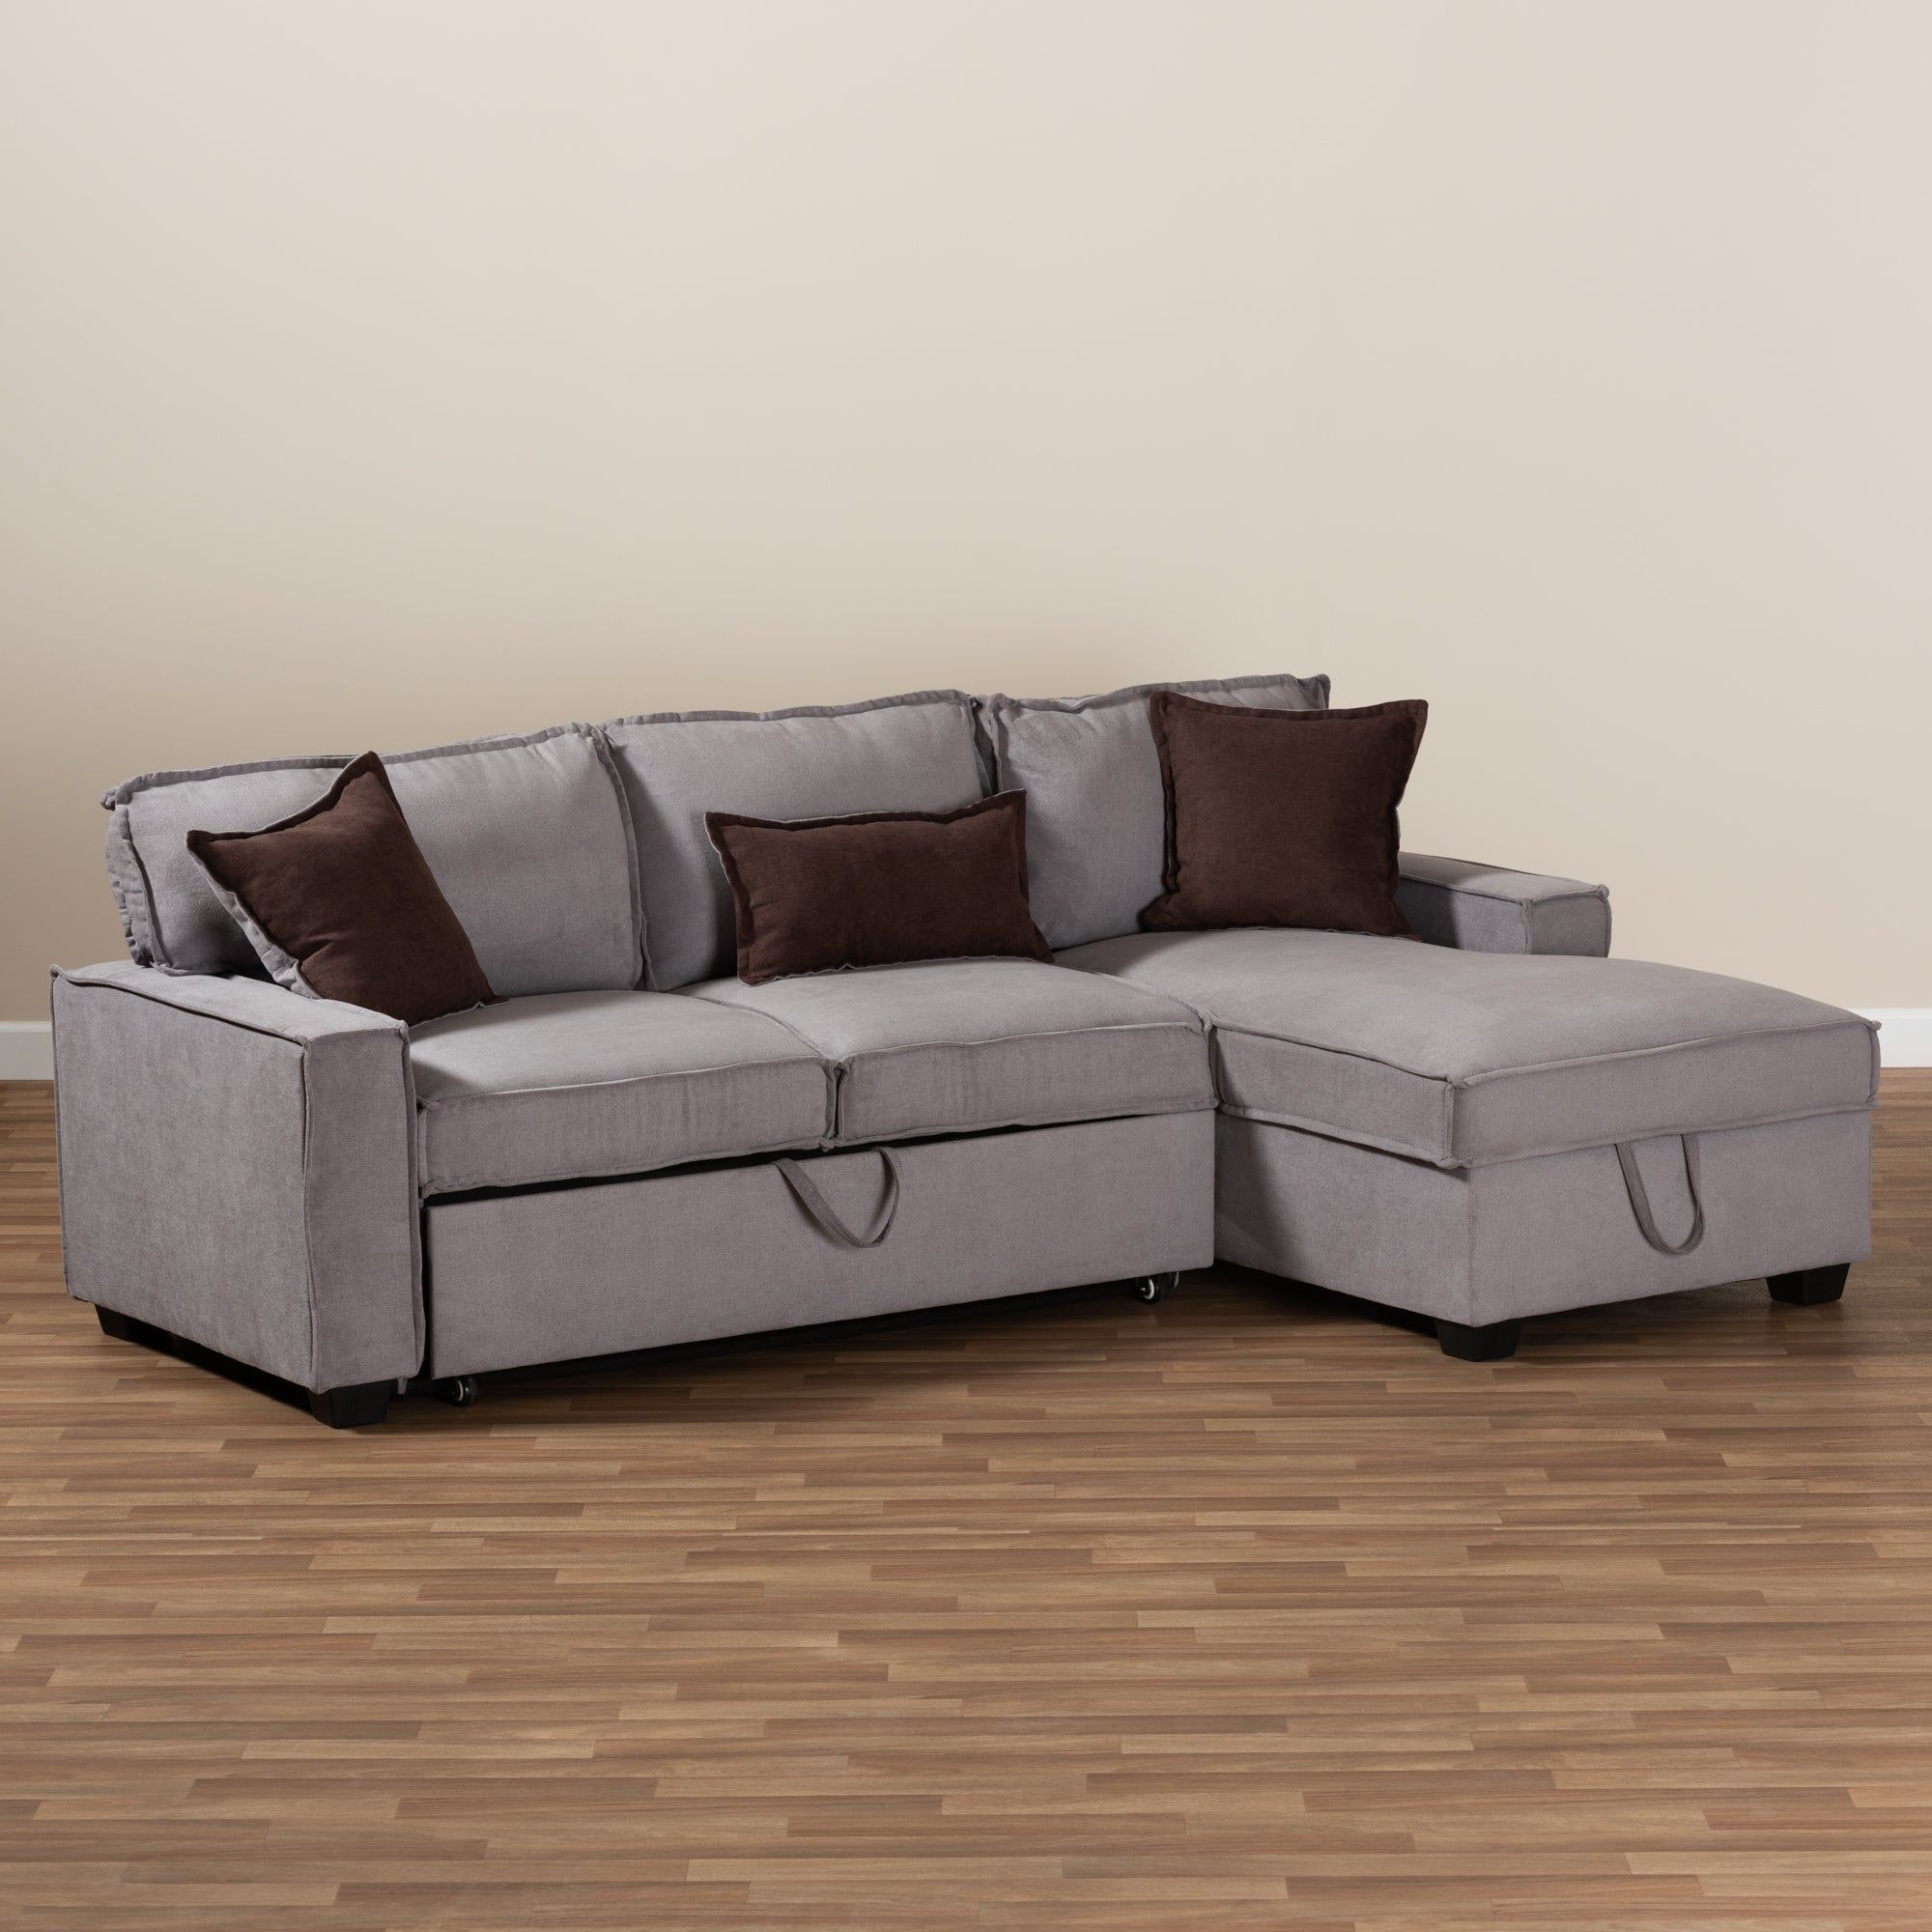 Functioning As A Sofa, Bed, And Storage All In One, The Emile Sofa Is A Within Right Facing Black Sofas (Gallery 7 of 20)